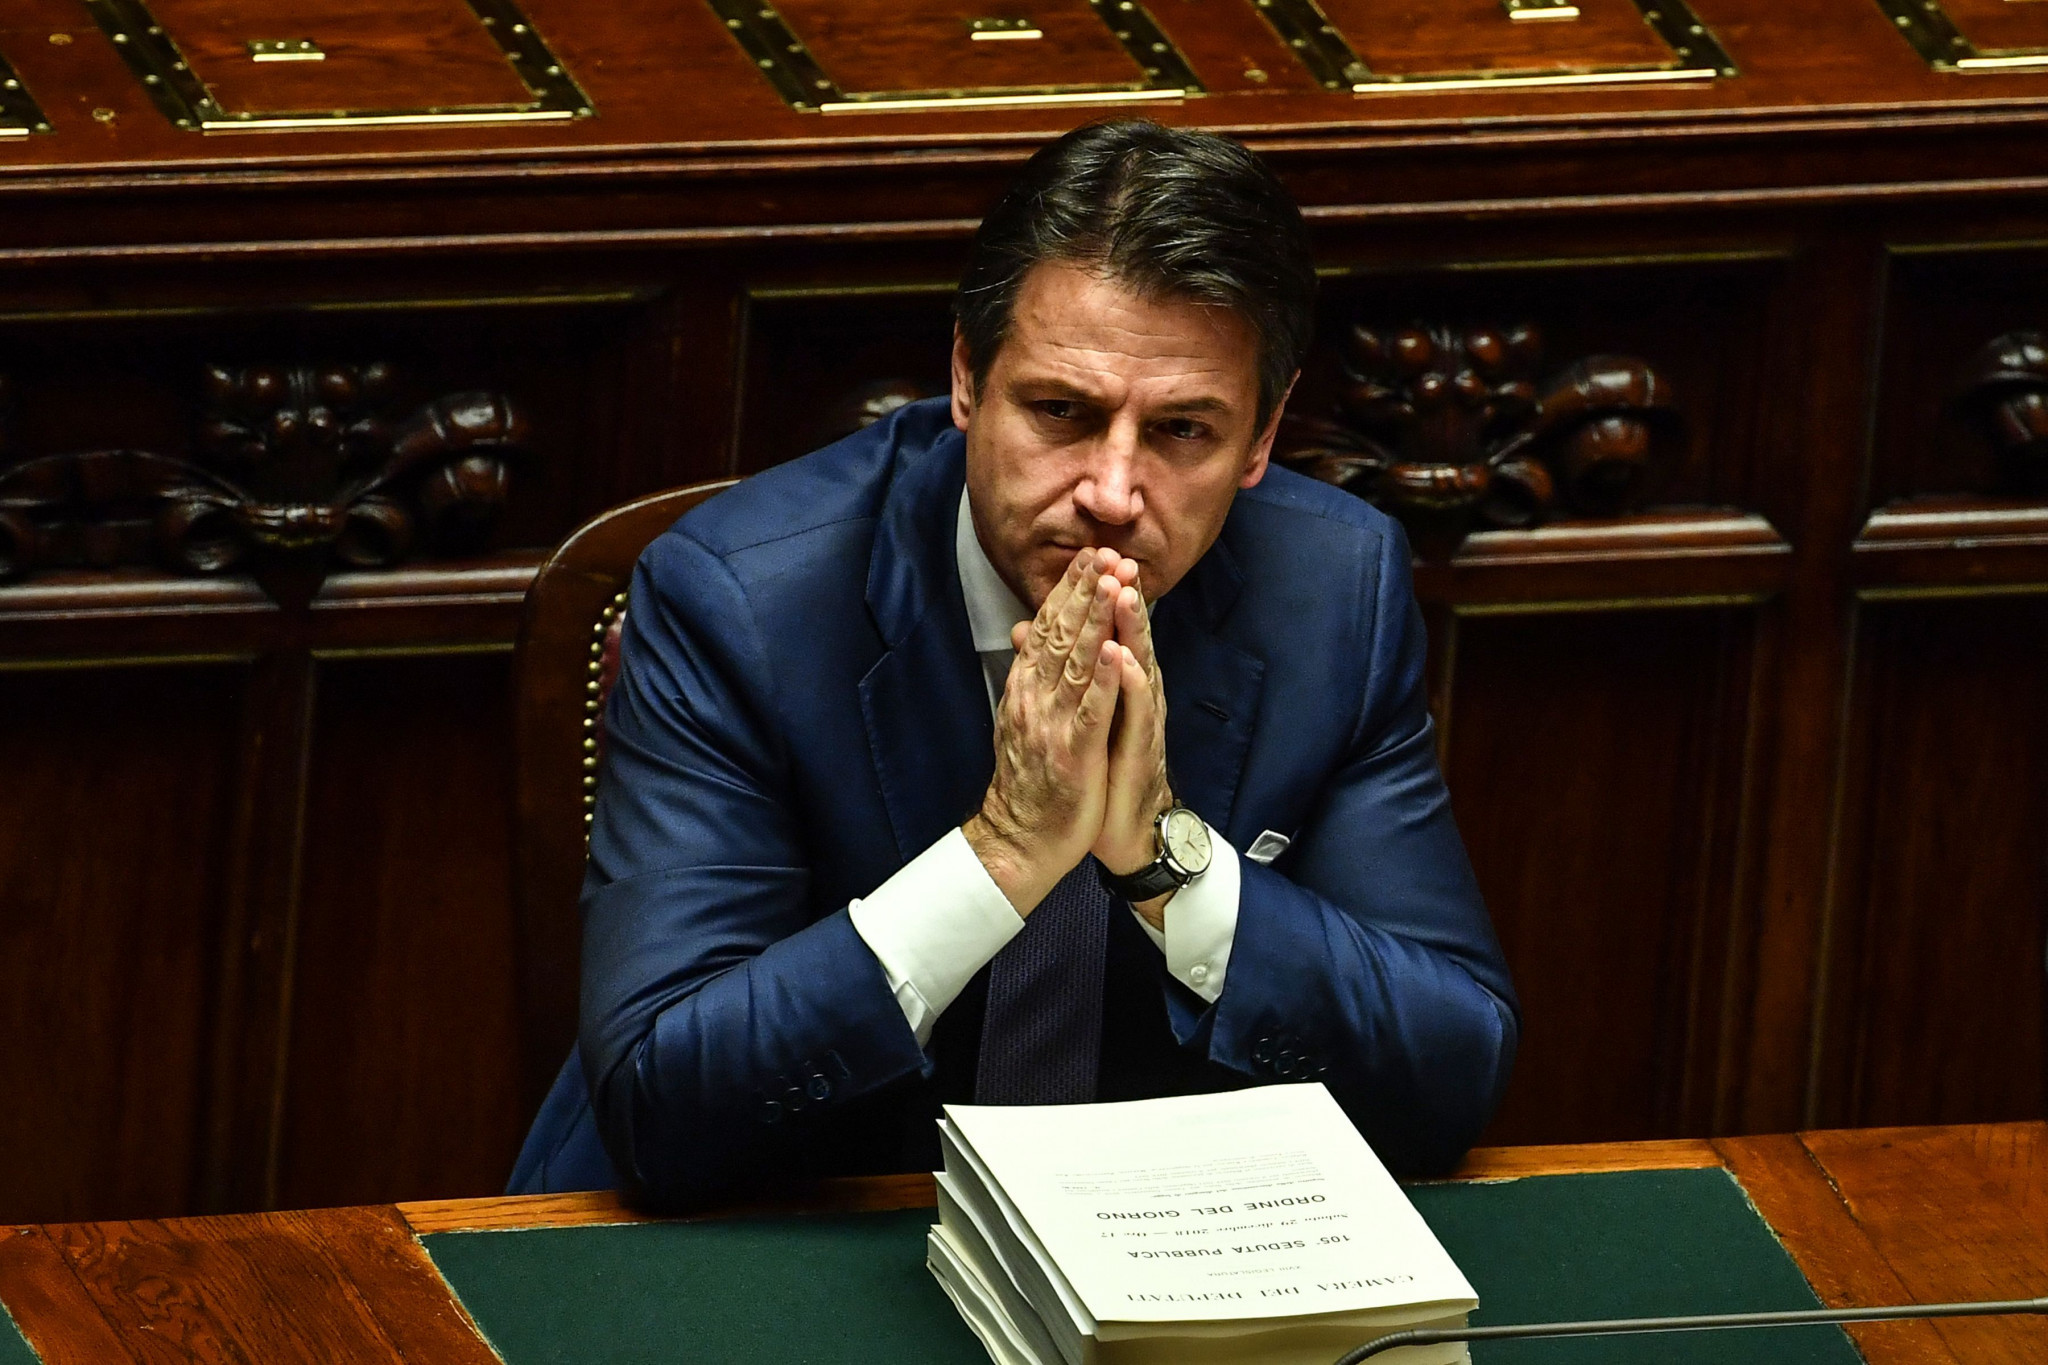 Giuseppe Conte has written a letter to the IOC in which he confirms Government support for the Italian bid ©Getty Images